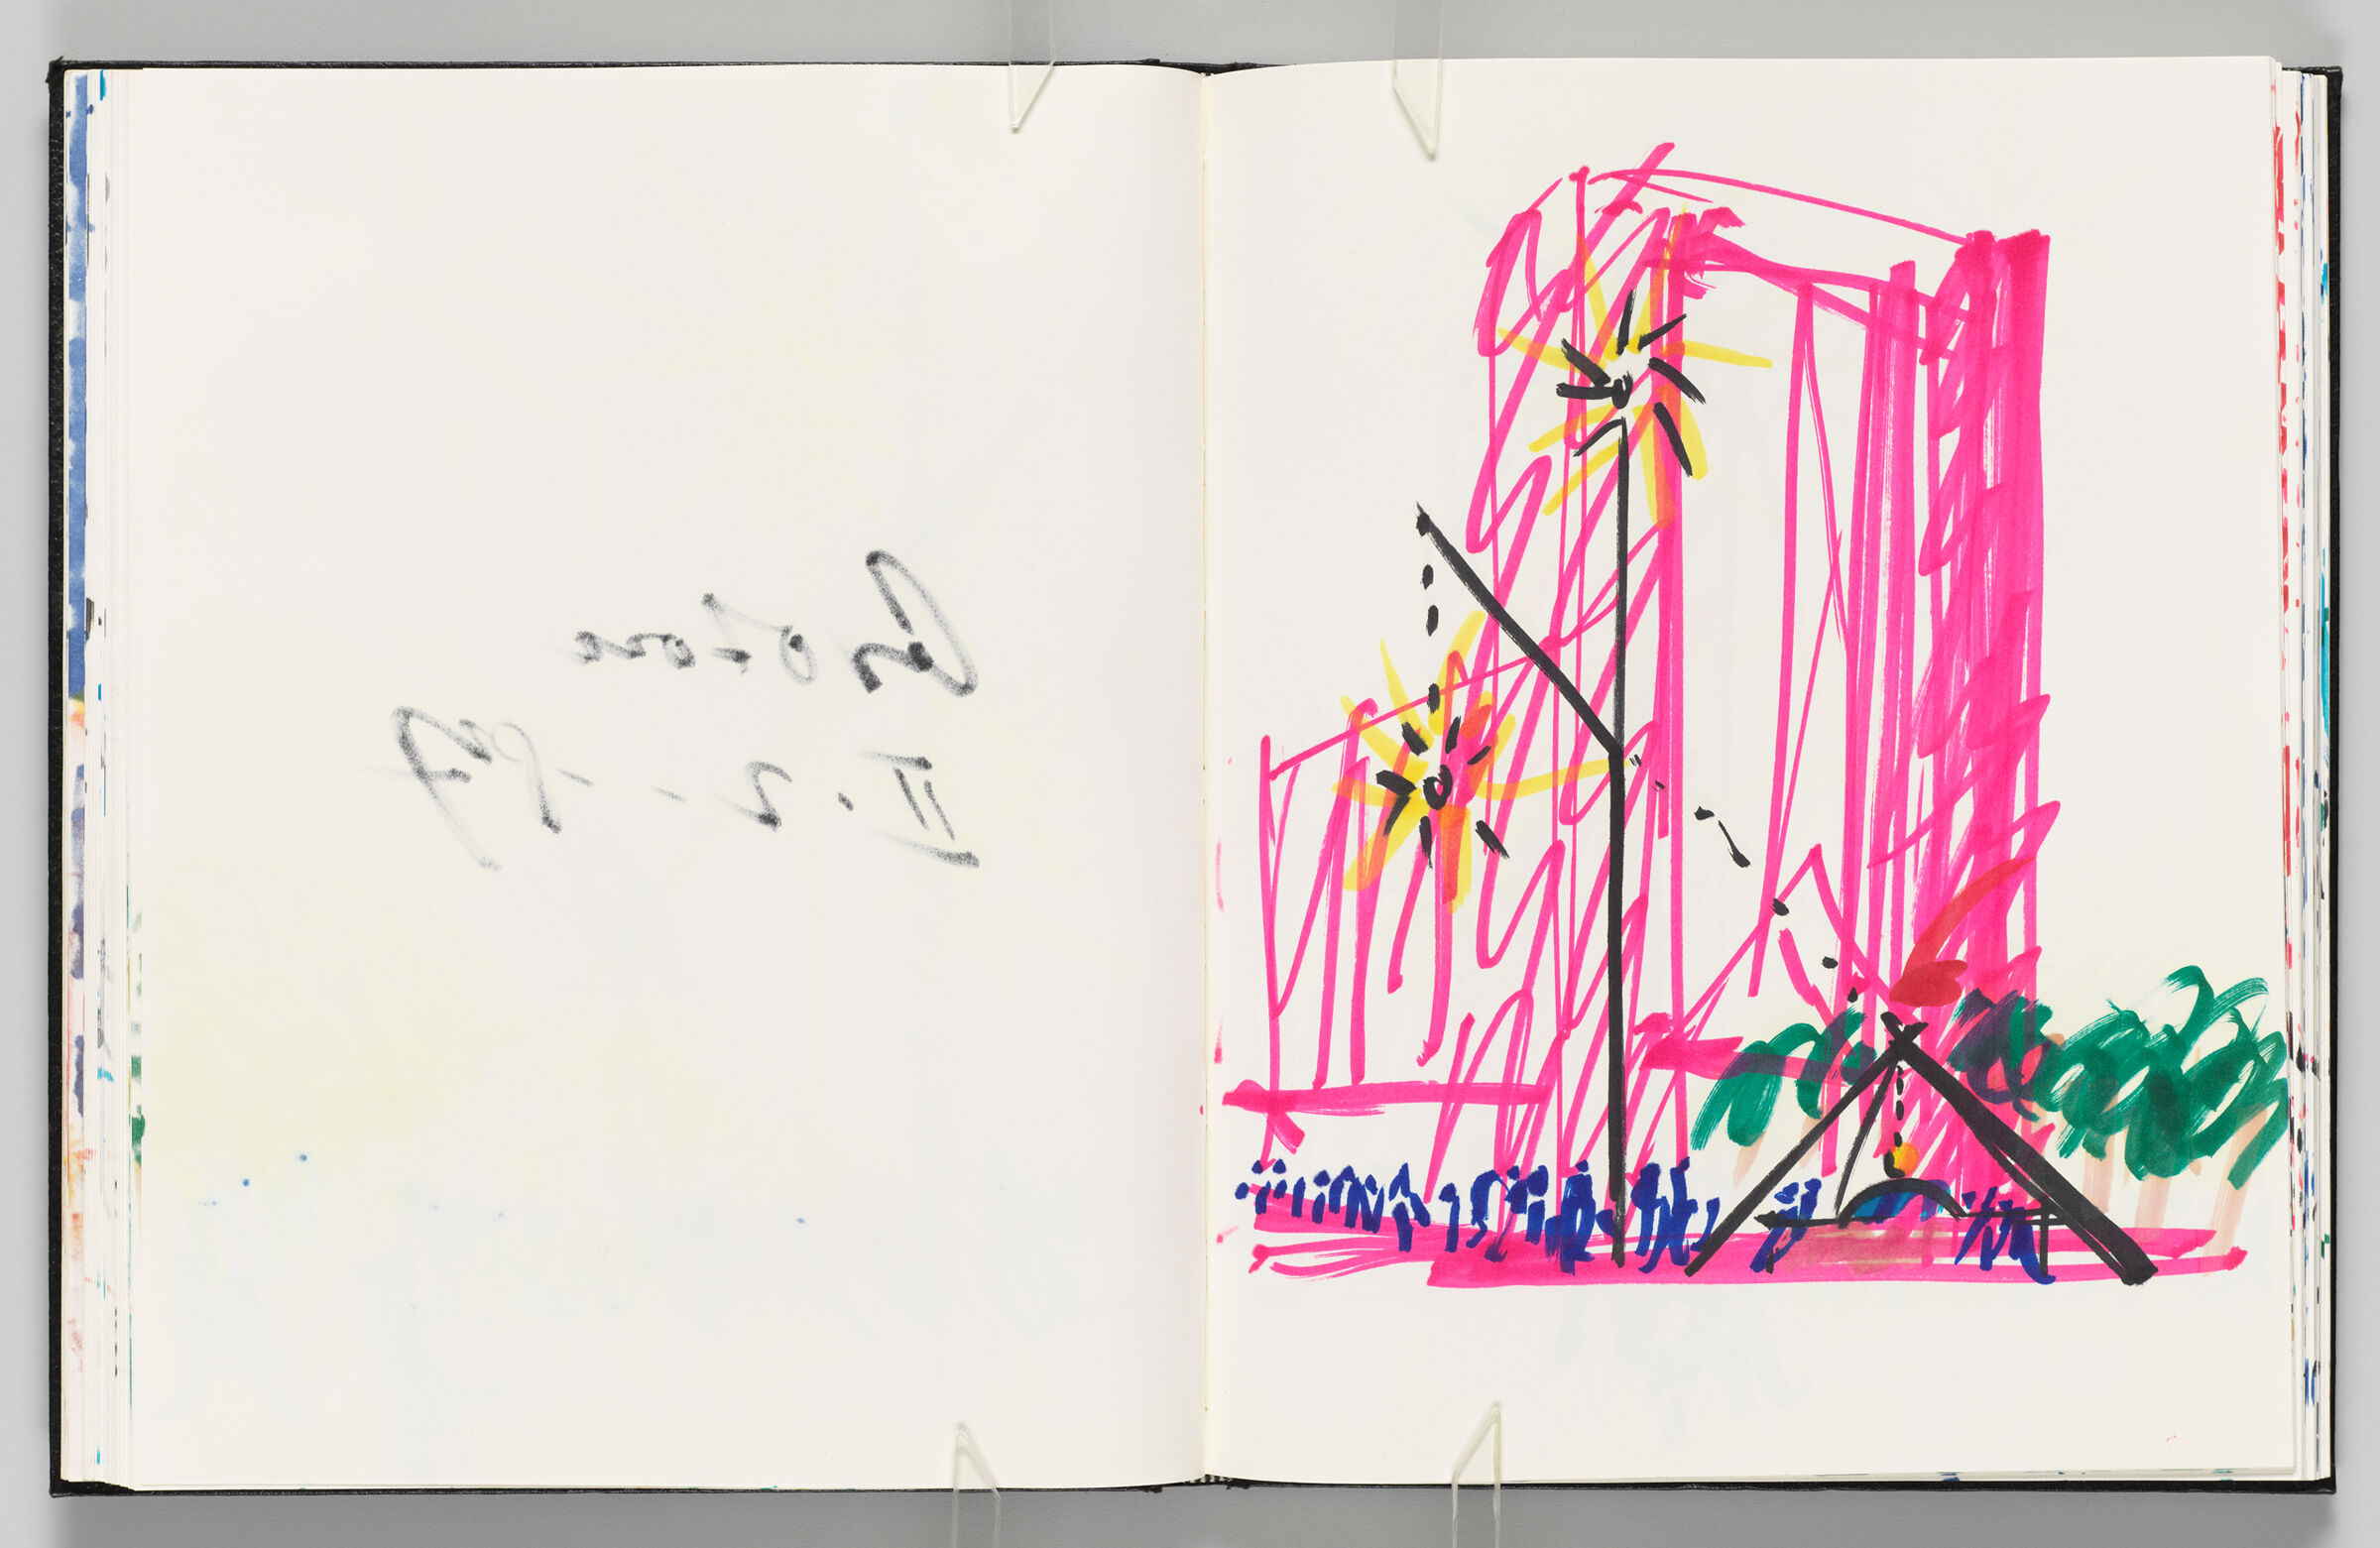 Untitled (Bleed-Through Of Previous Page, Left Page); Untitled (Sculpture Design With Figures, Right Page)